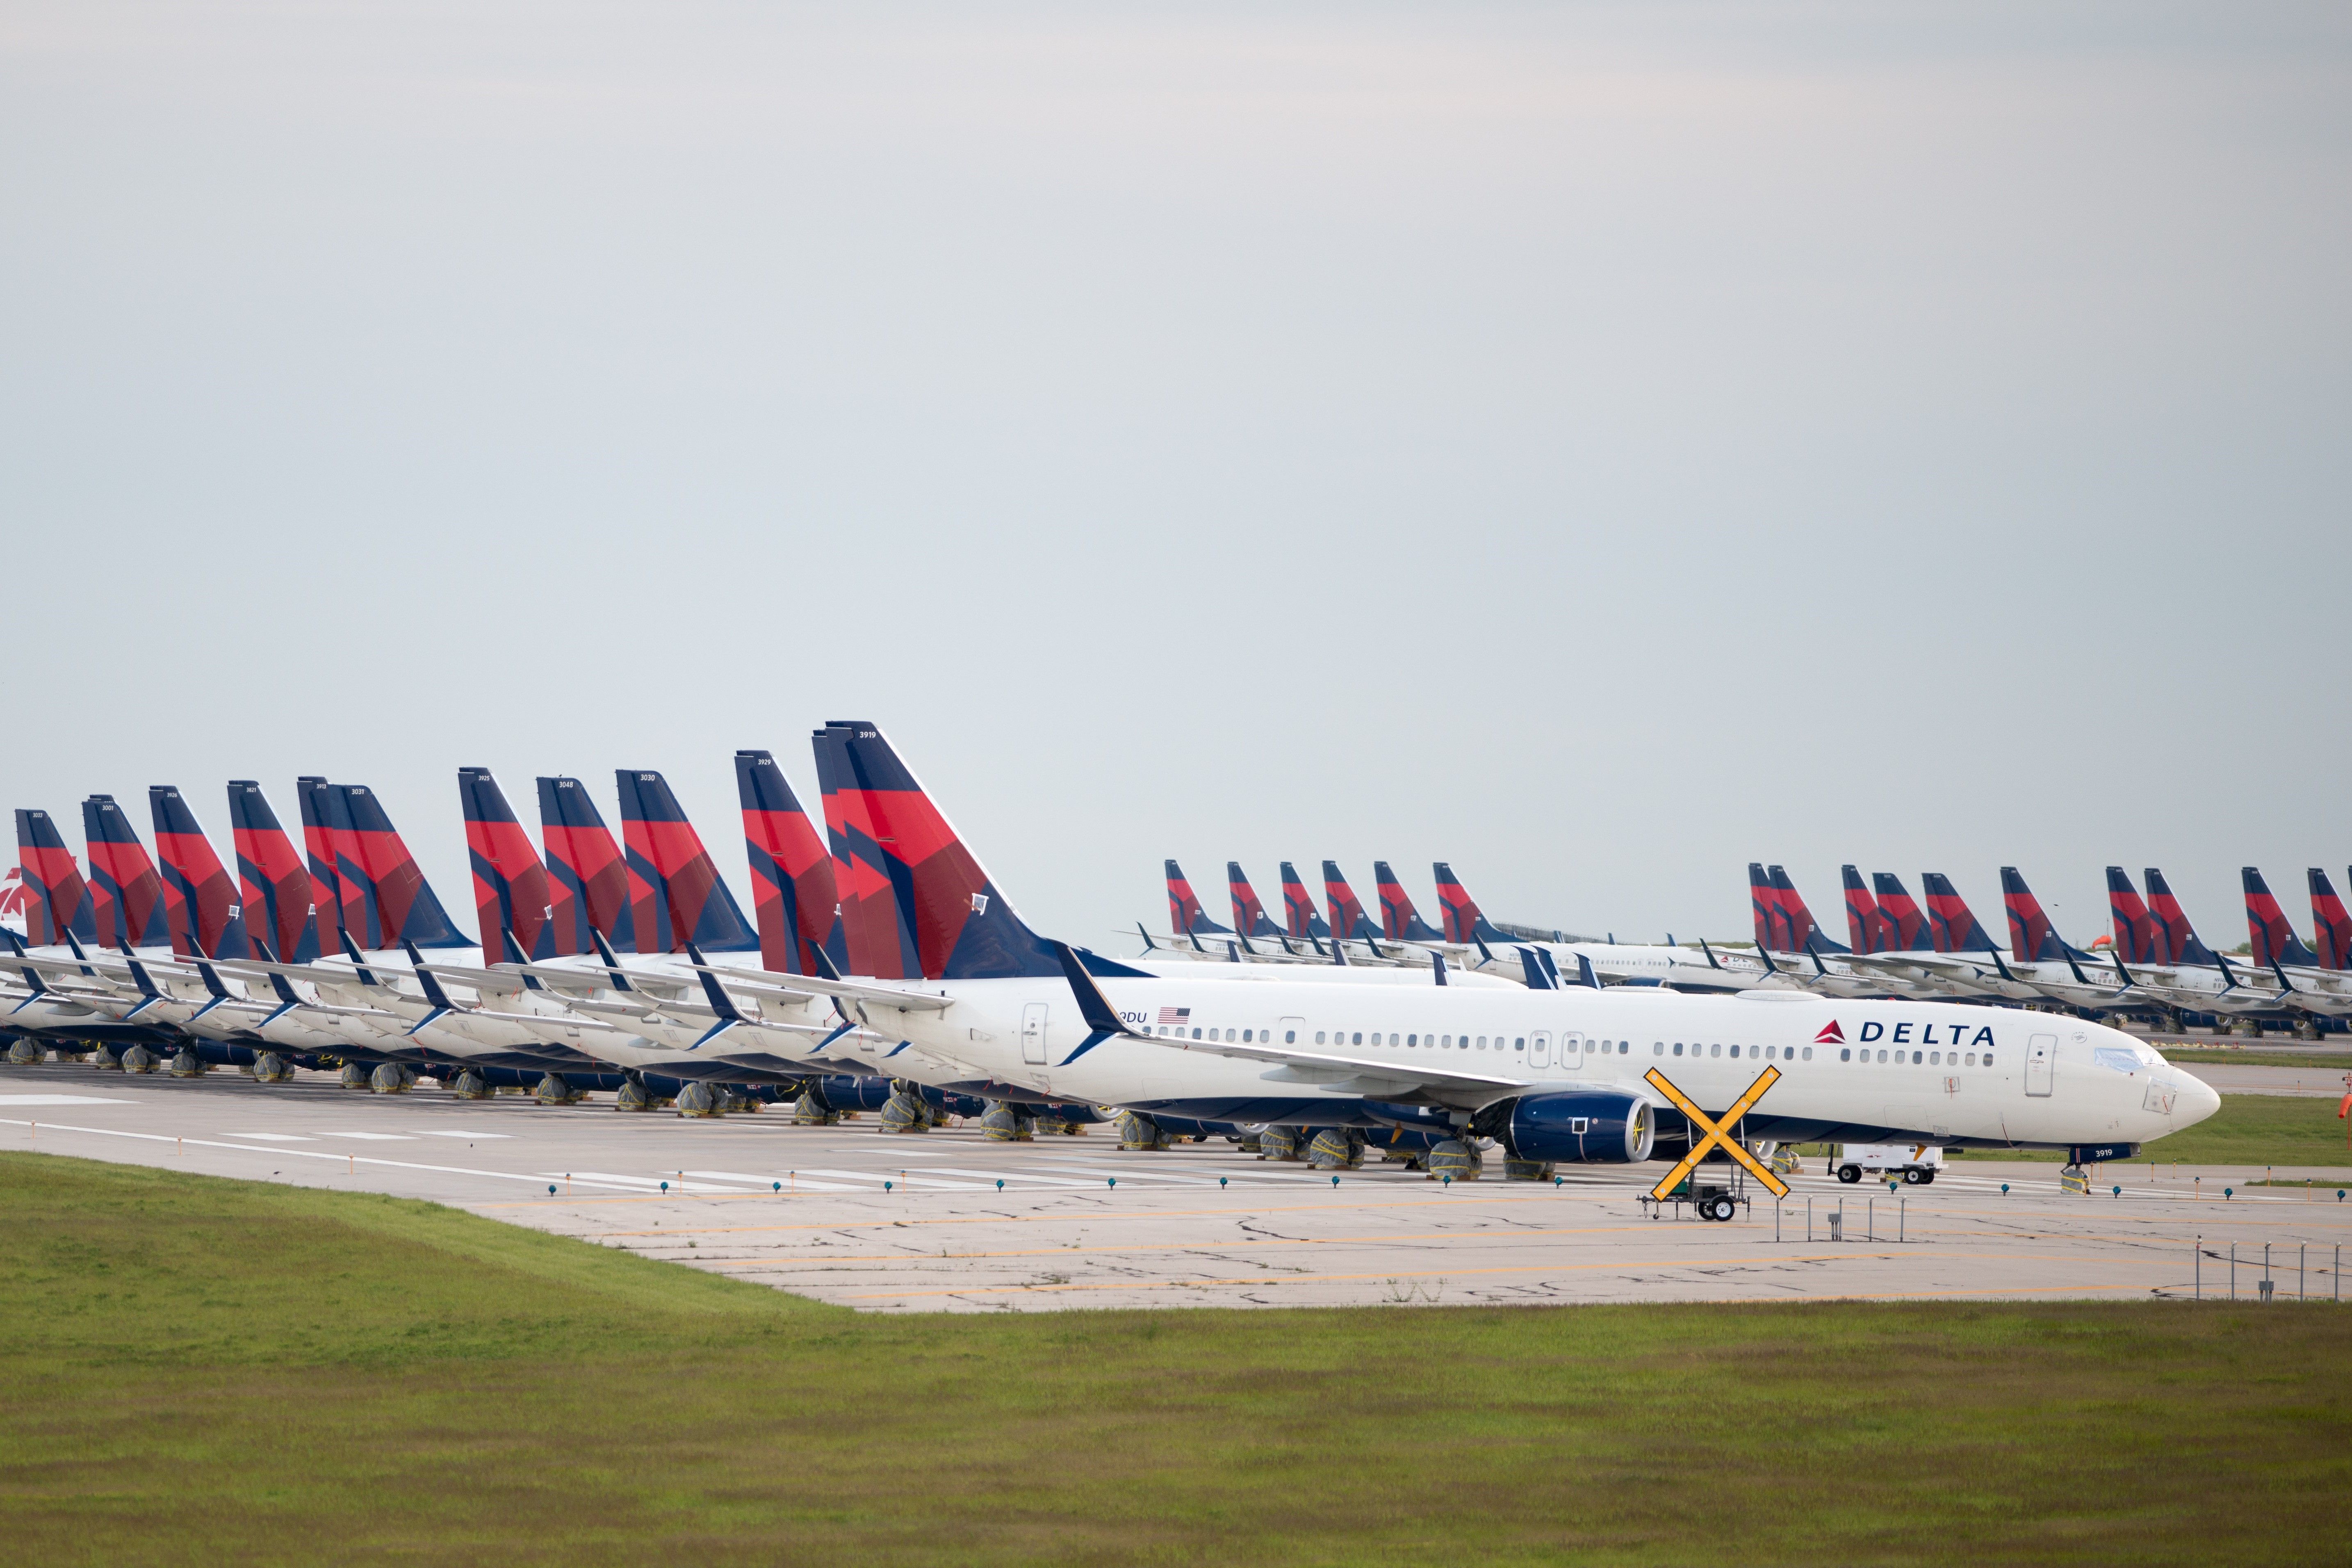 Delta Air Lines Planes Parked In Kansas City